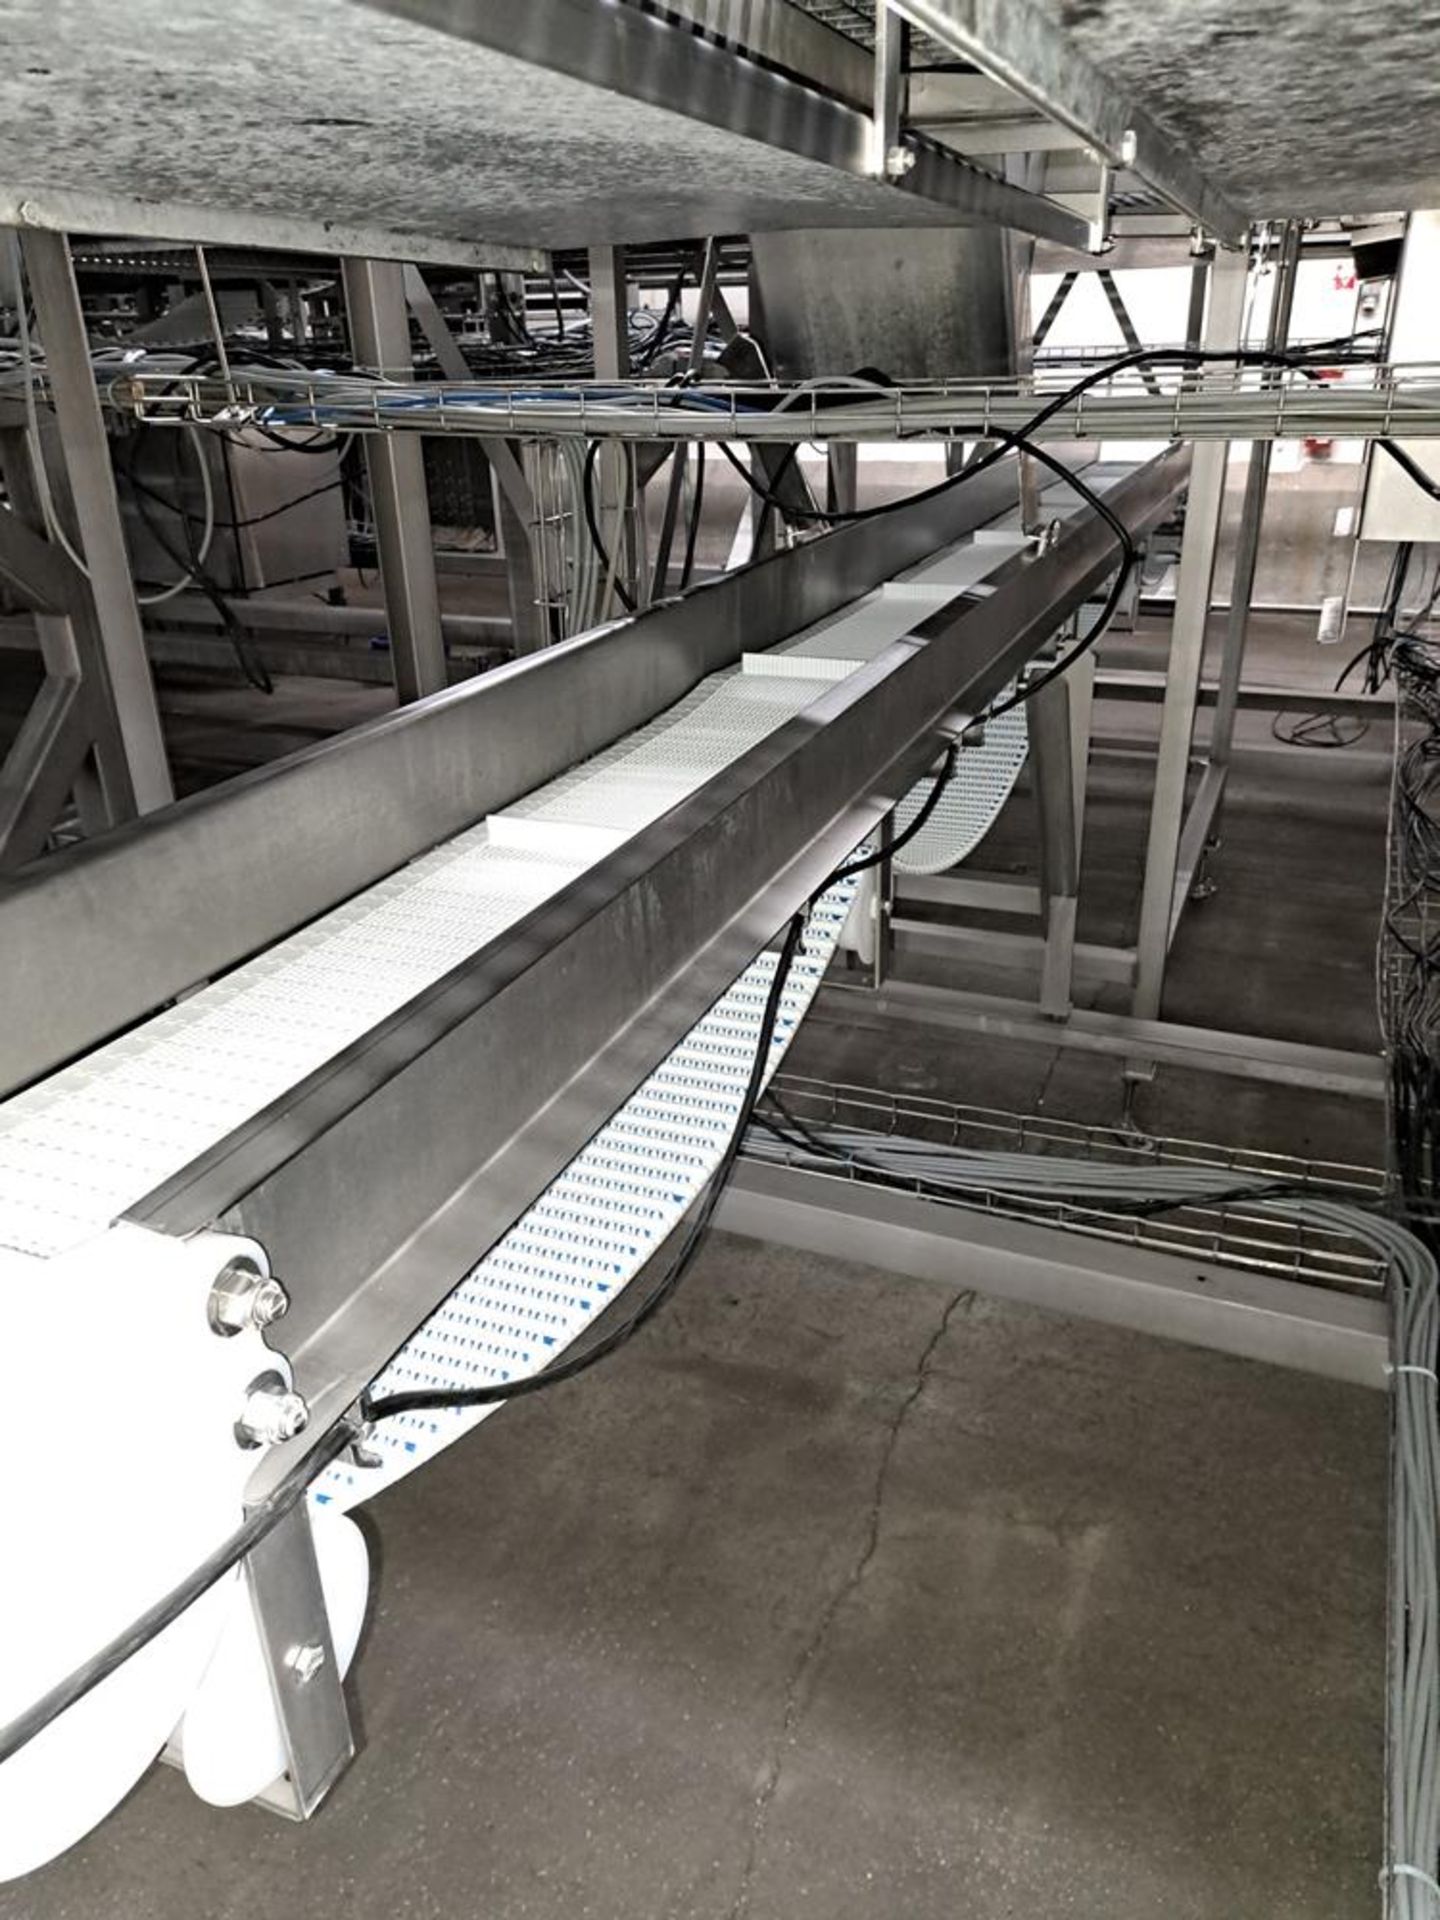 Frontmatec Stainless Steel Conveyor, 12" W X 18' L (13' to incline), 30" infeed, 68" discharge,